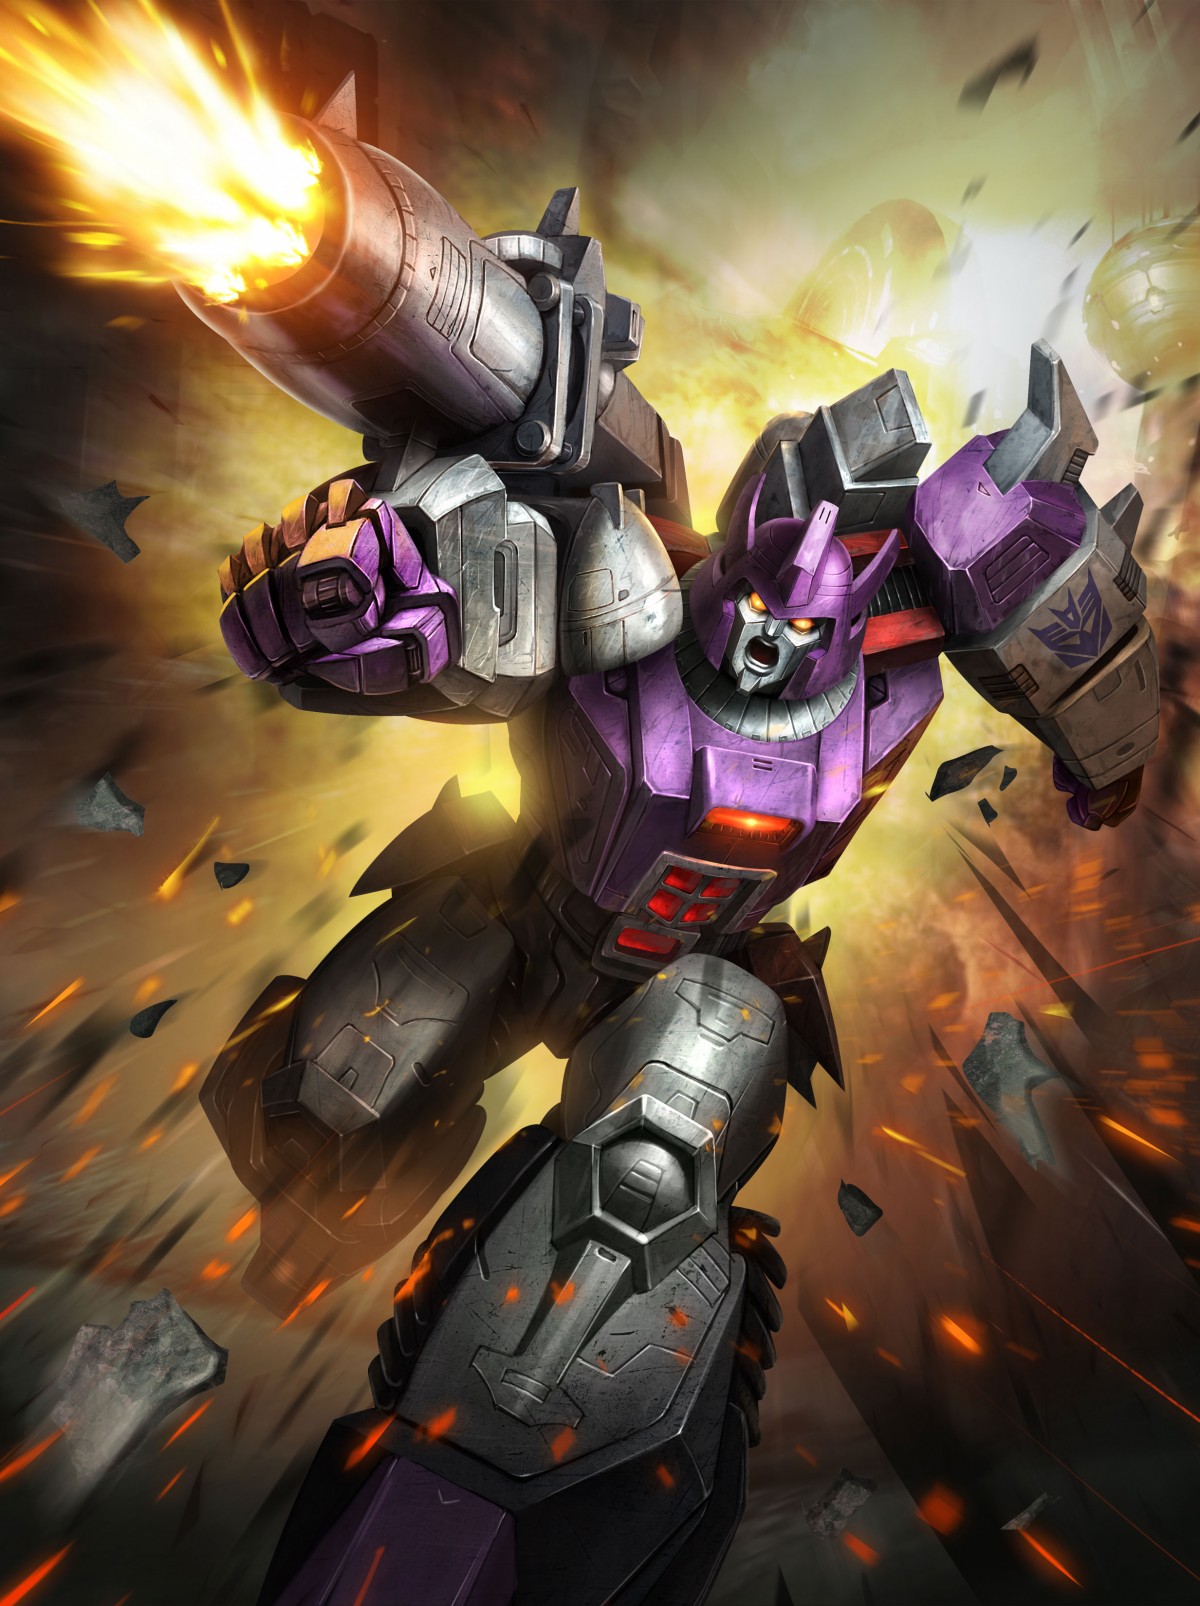 Re: Transformers: Legends Mobile Device Game Updates